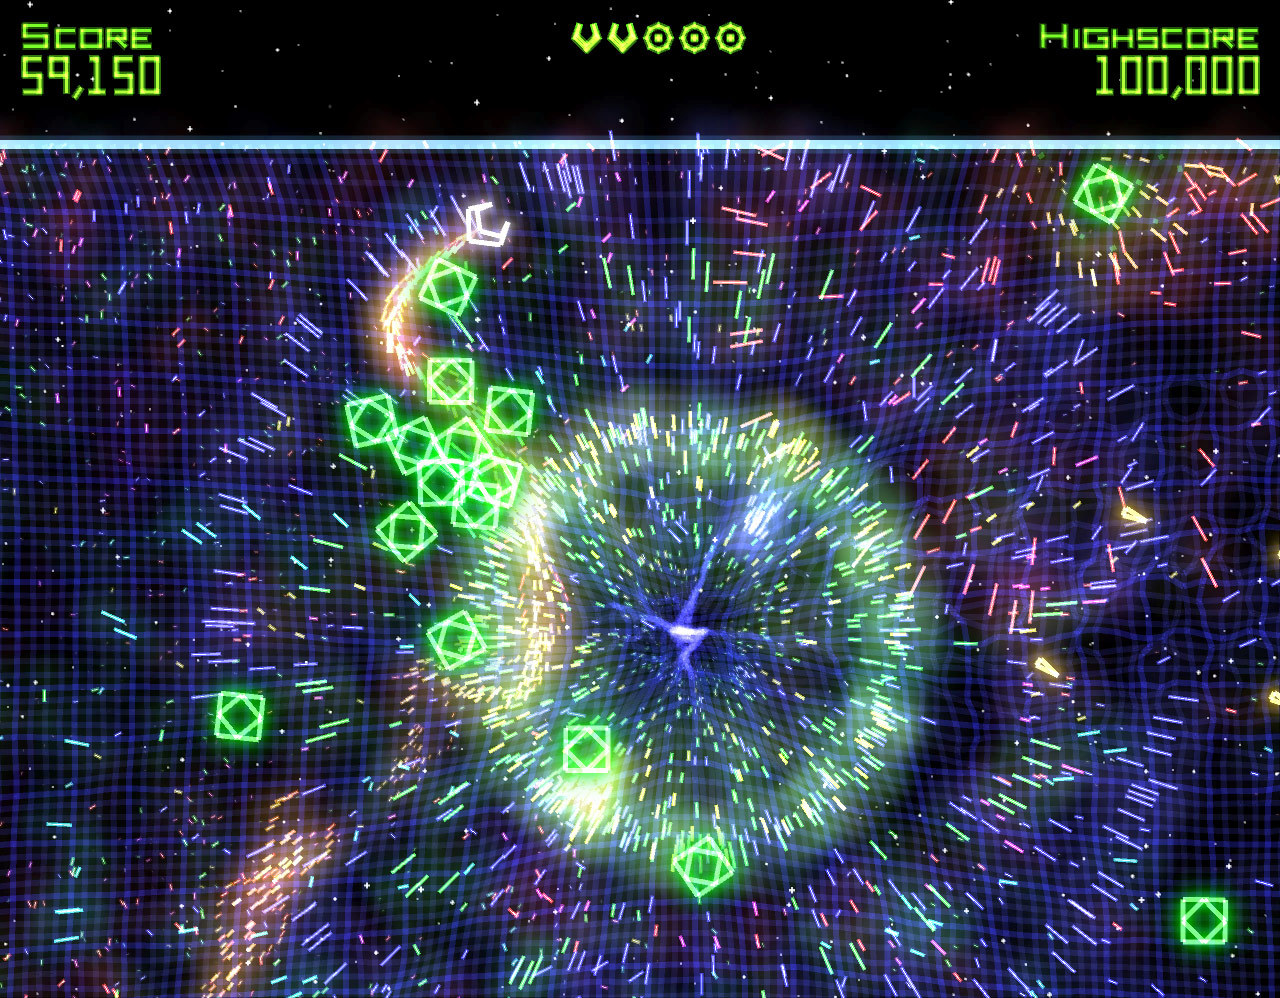 Save 50% on Geometry Wars: Retro Evolved on Steam